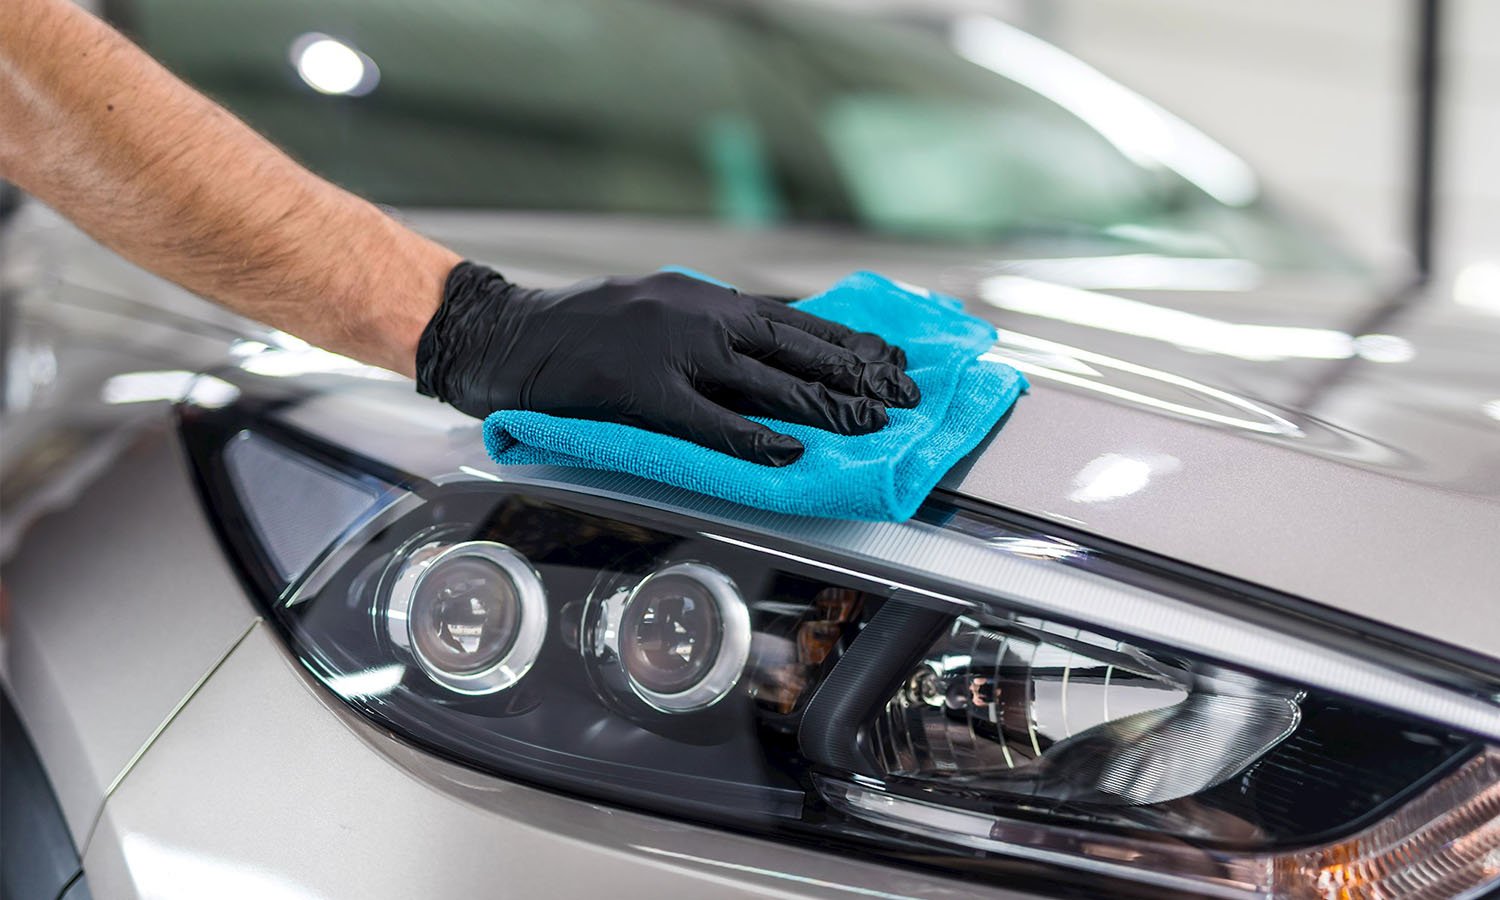 10 Car Detailing And Car Washing Tips To Keep Your Vehicle Looking Like New